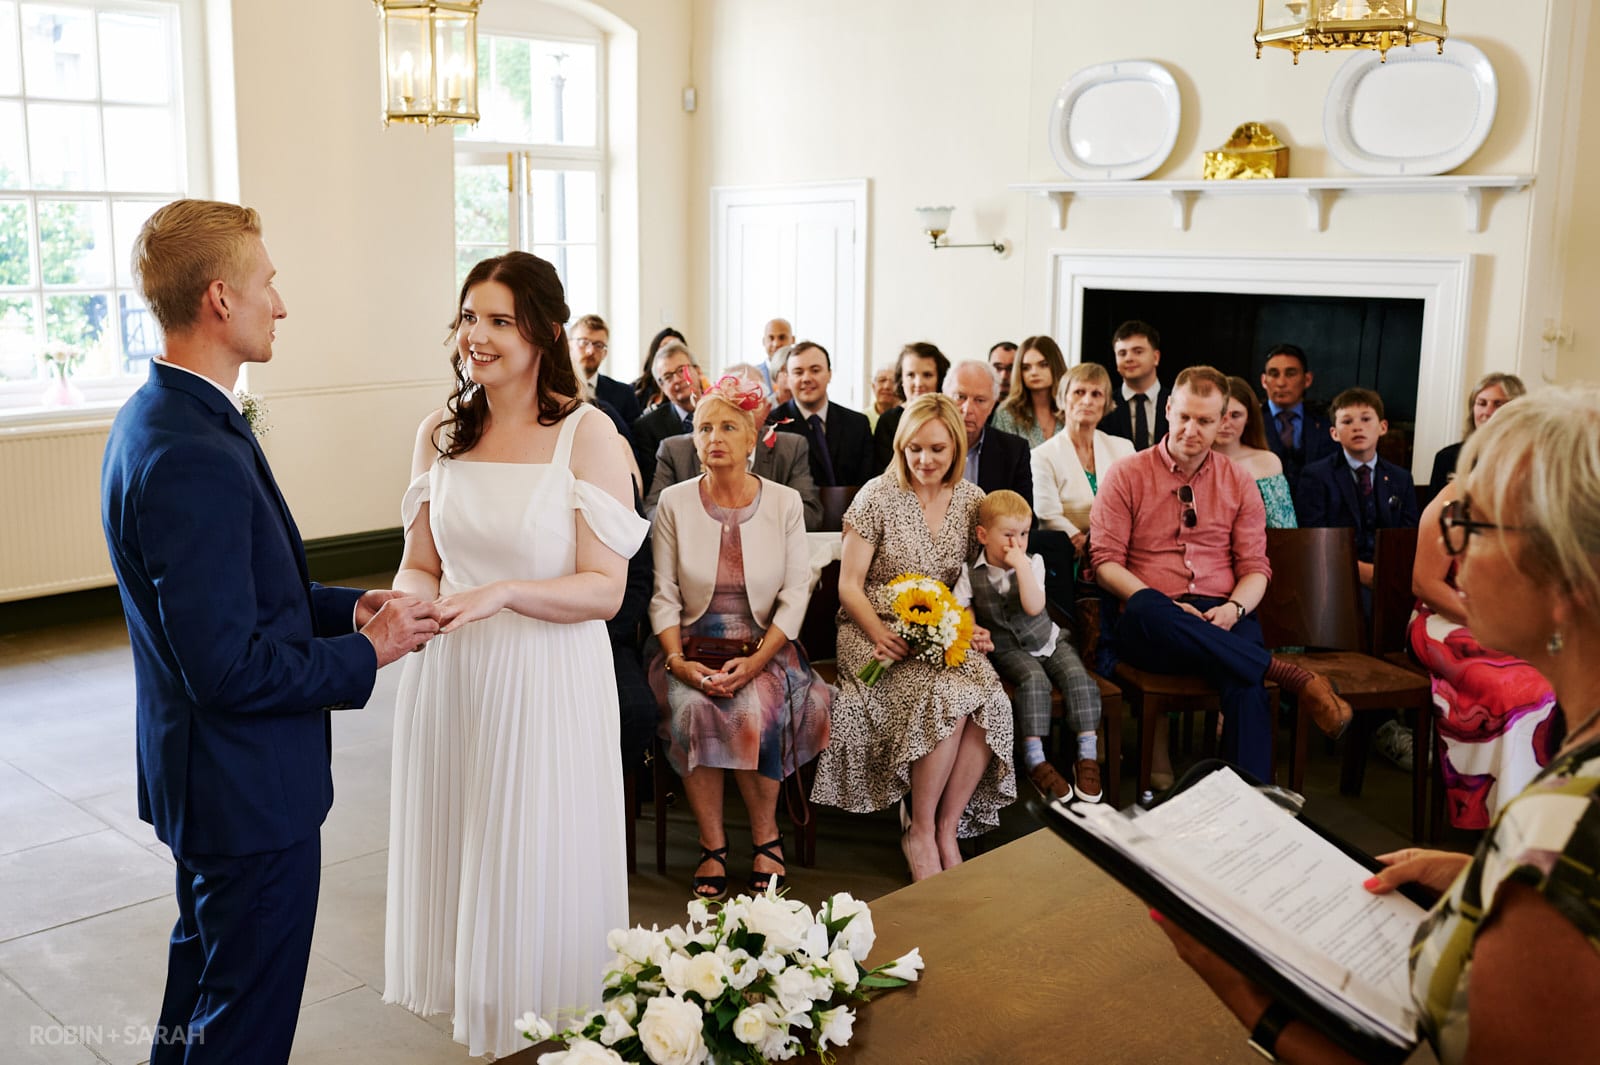 Bride and groom exchange wedding rings during wedding ceremony at Priory Place Registration Office in Doncaster